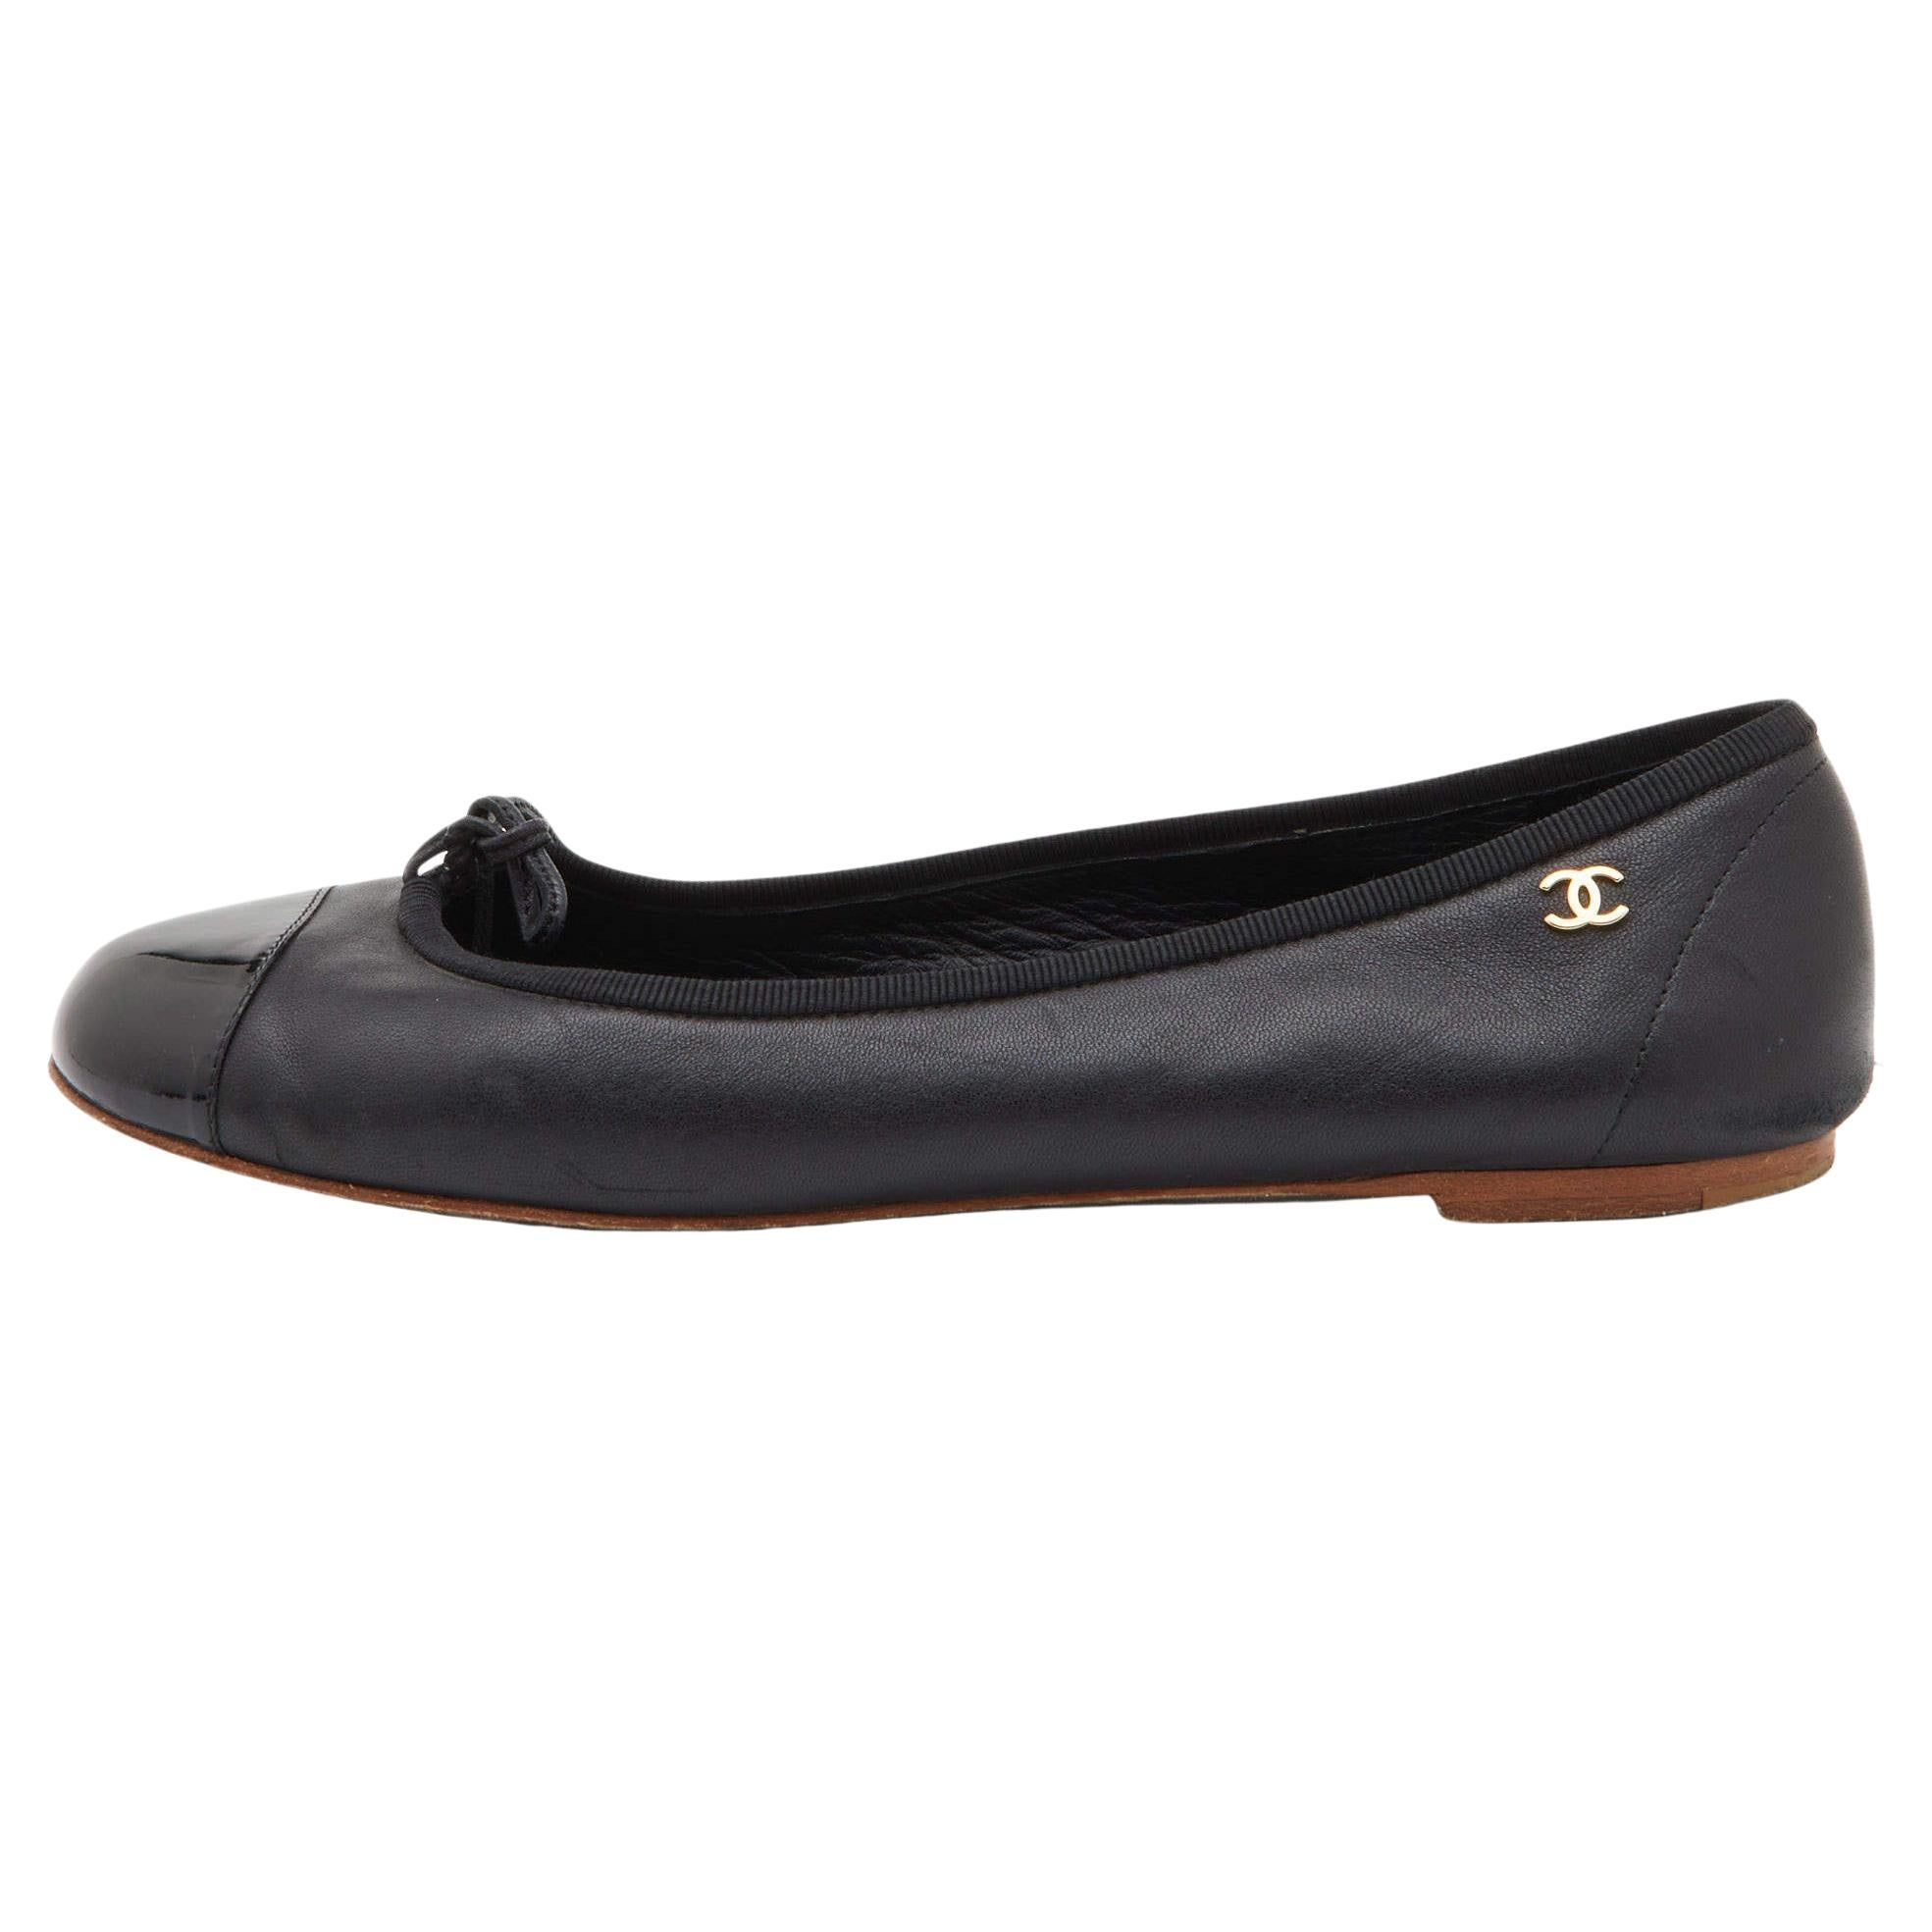 Chanel Black Leather and Patent Cap Toe Bow CC Ballet Flats Size 38